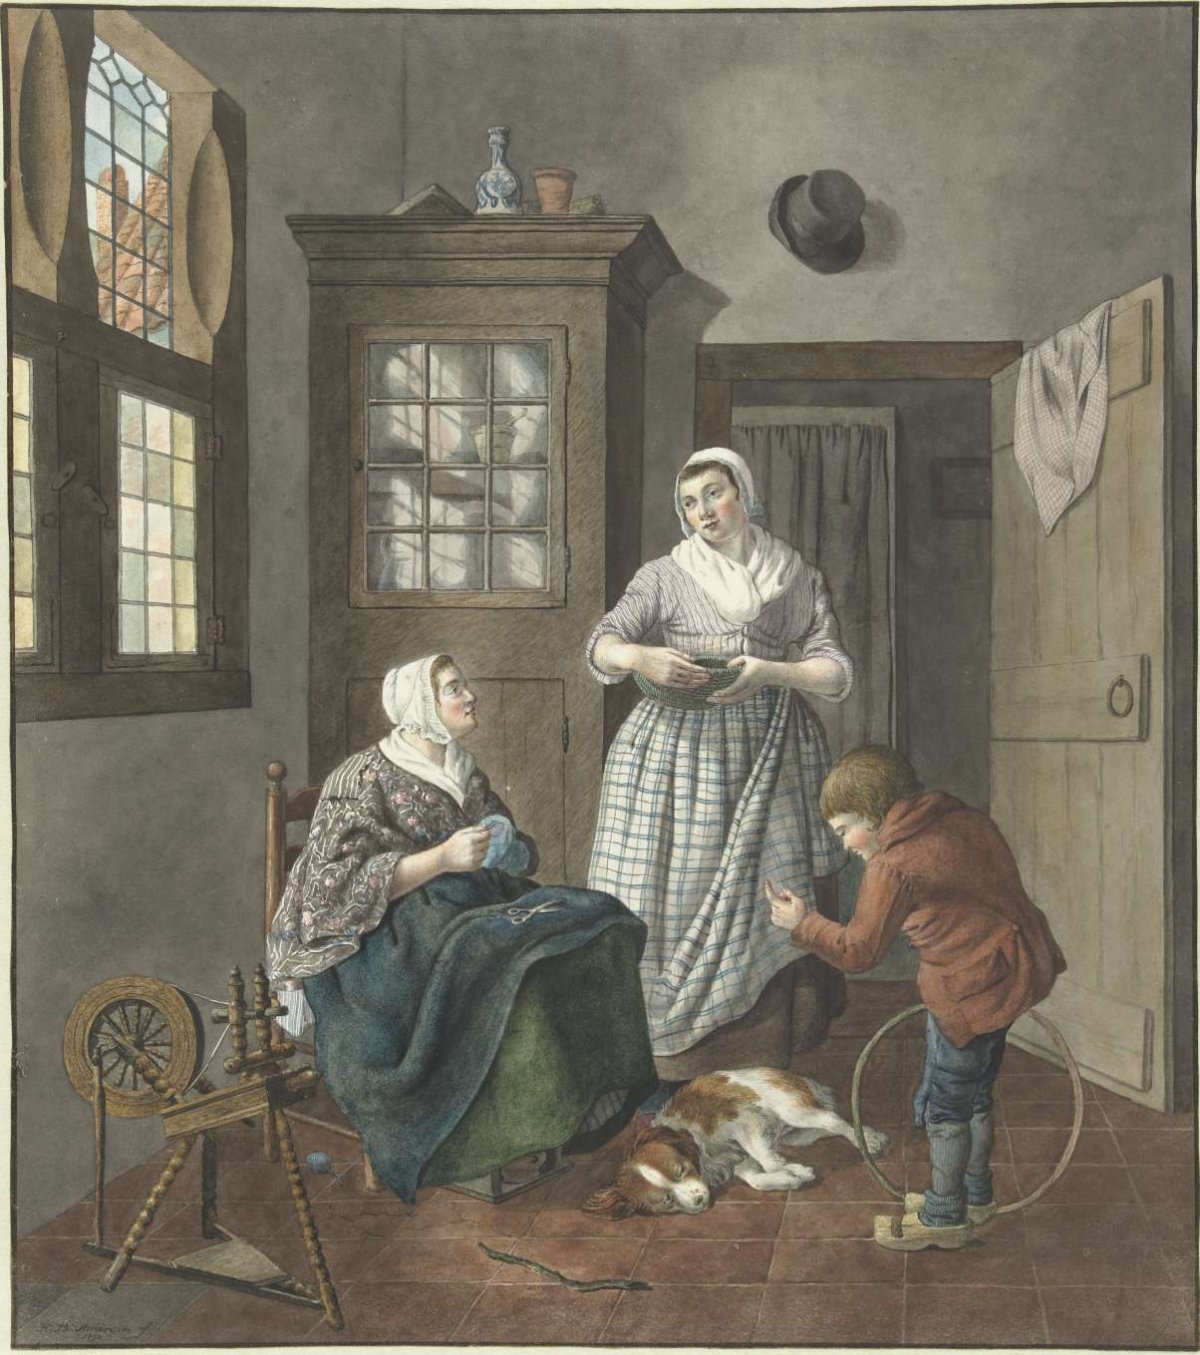 Interior with sewing woman, maid and boy playing, Hendrik Jan van Amerom, 1797